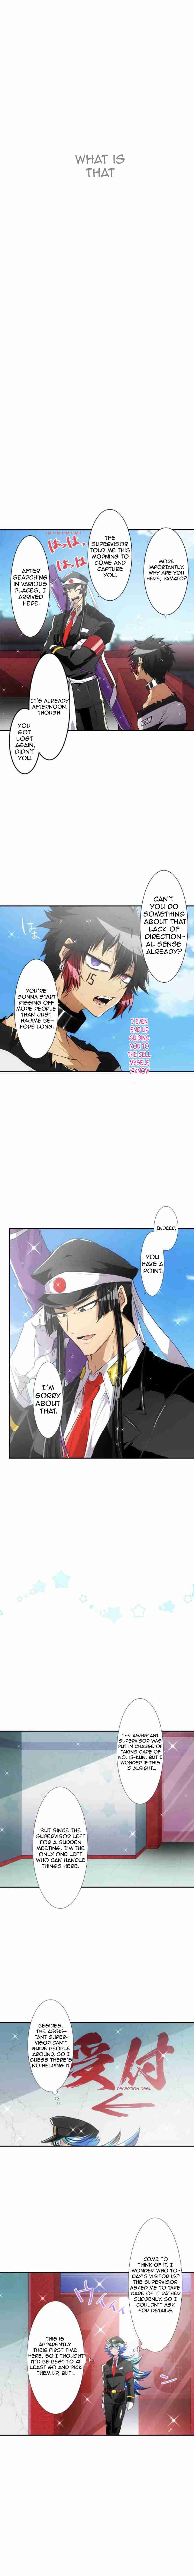 Nanbaka Ch. 174 One Thing After Another